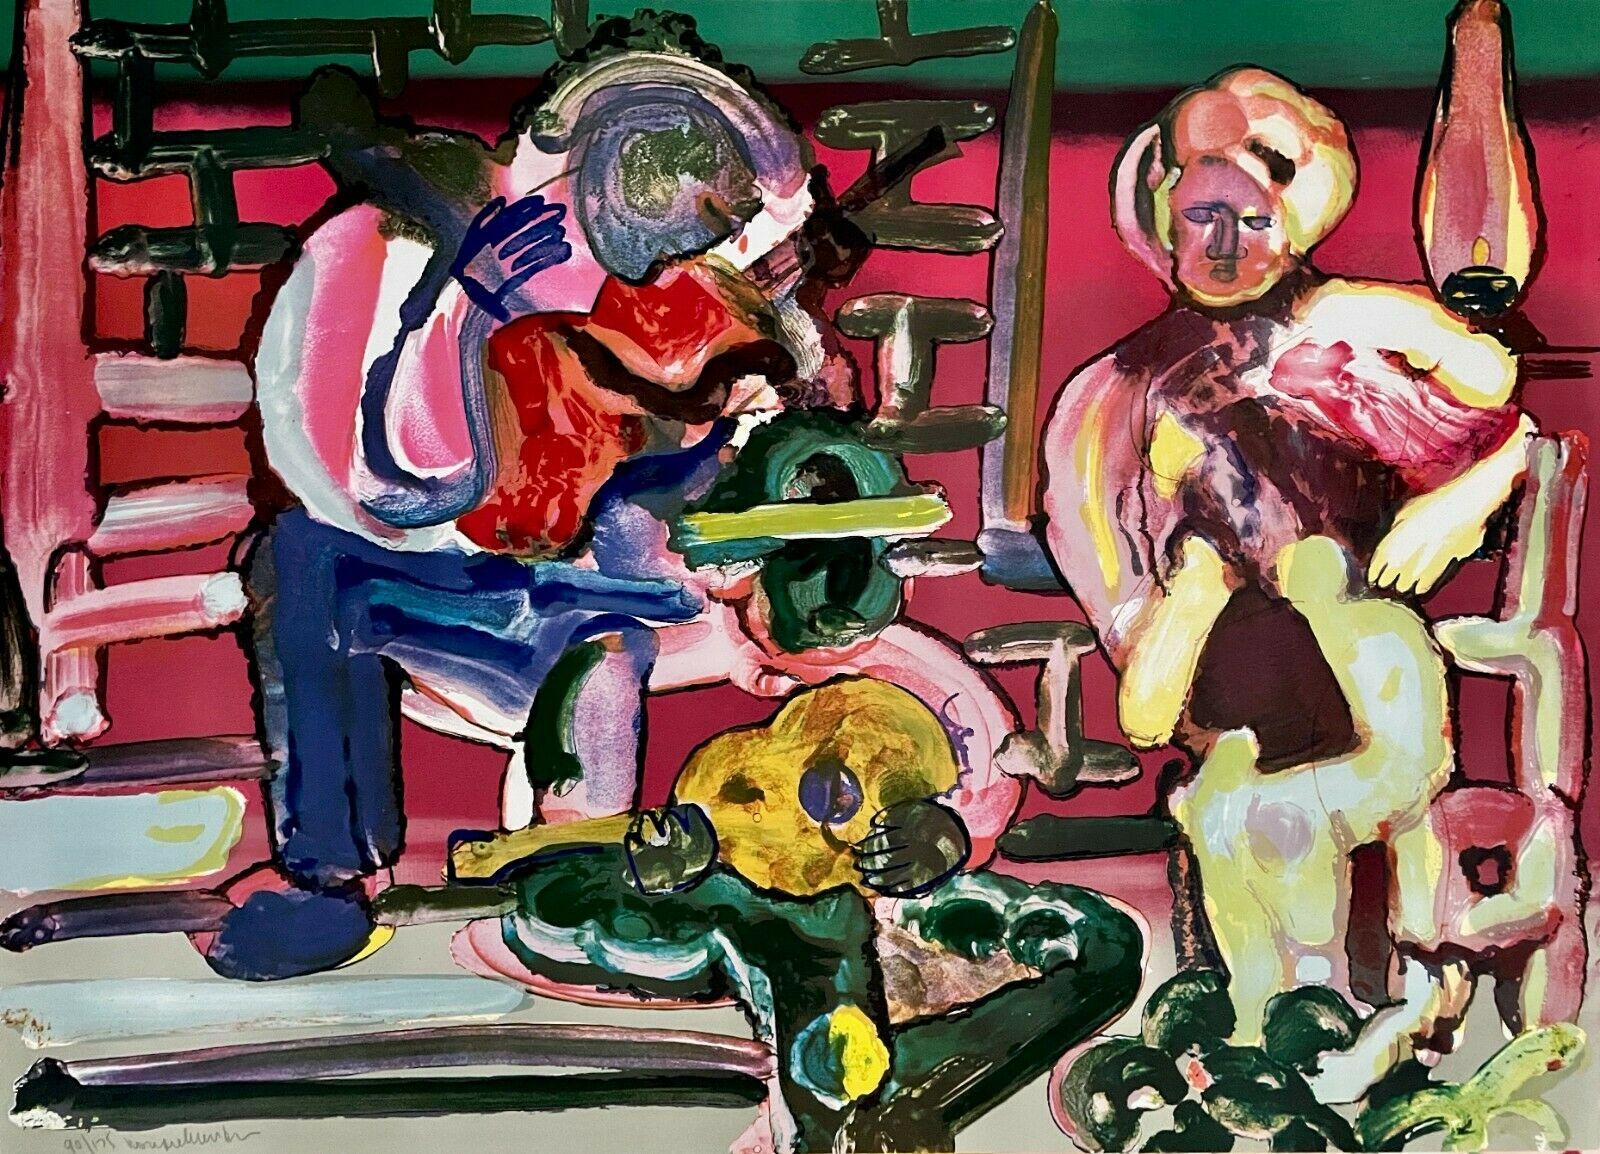 Artist: Romare Bearden (1911-1988)
Title: Louisiana Serenade (Gelburd/Rosenberg 77)
Year: 1979
Medium: Lithograph on Arches paper
Edition: 46/175, plus proofs
Size: 24. x 33.75 inches
Condition: Excellent
Inscription: Signed and numbered by the